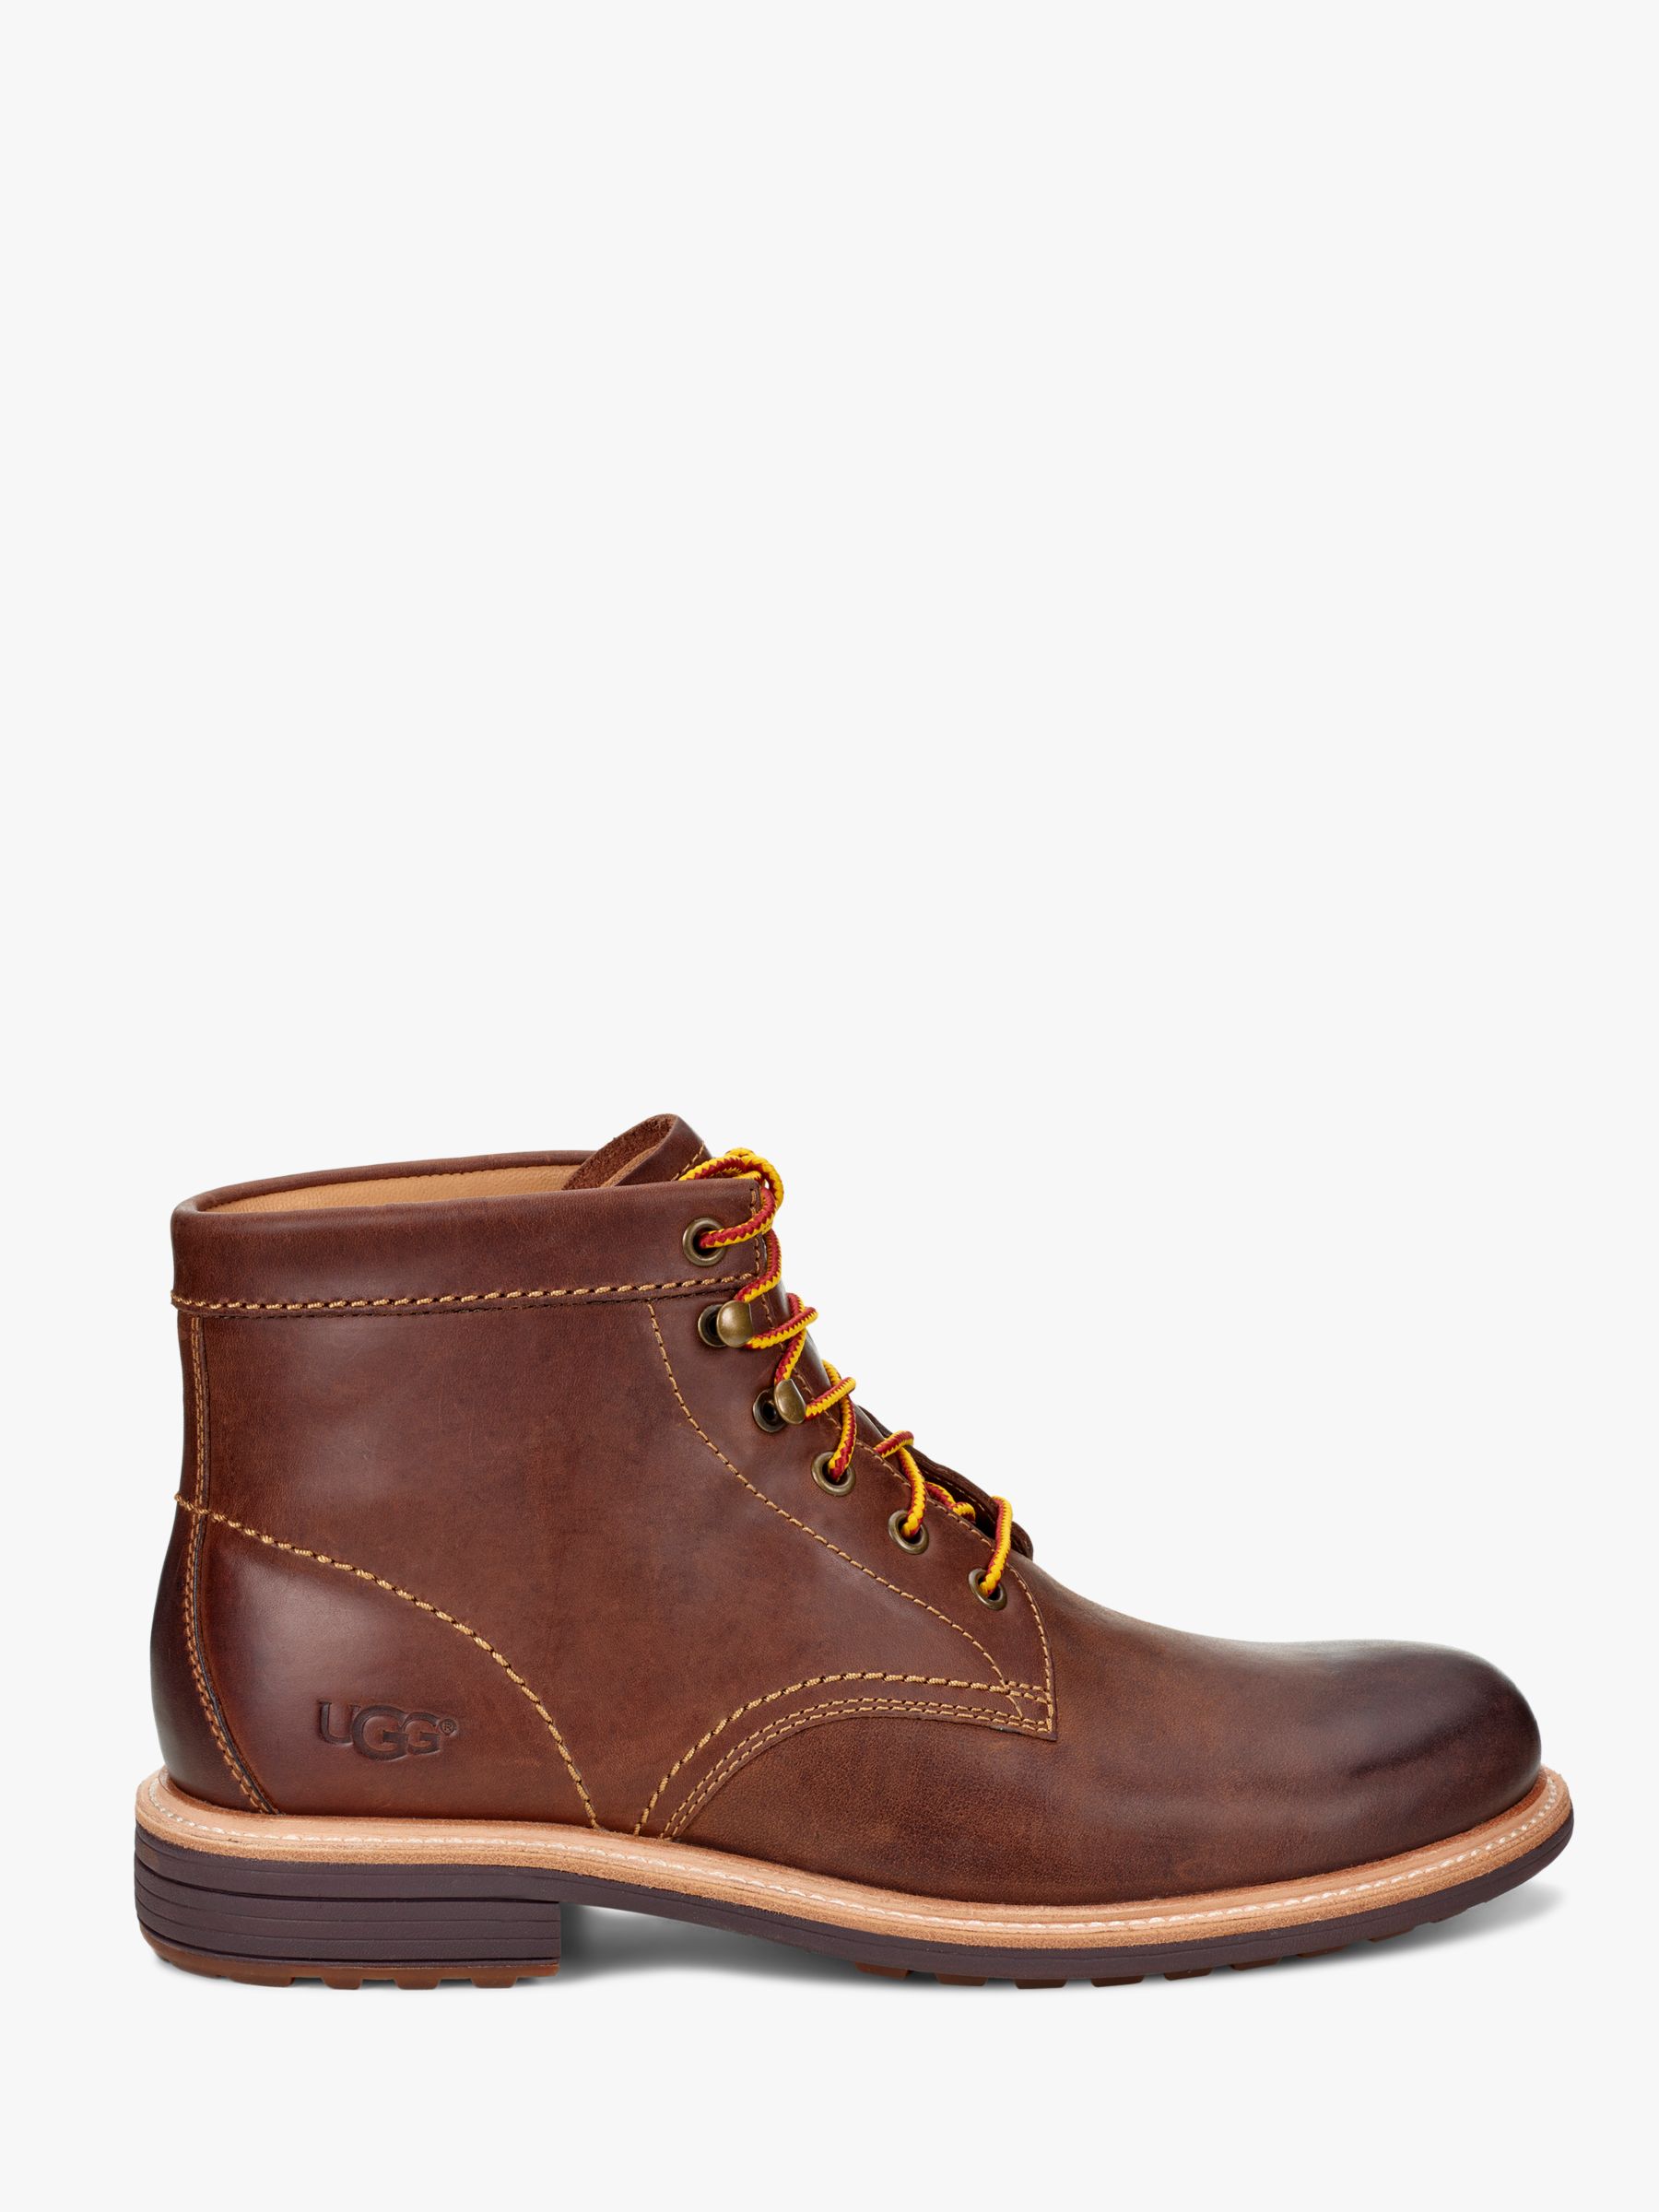 UGG Vestmar Boots, Grizzly at John 